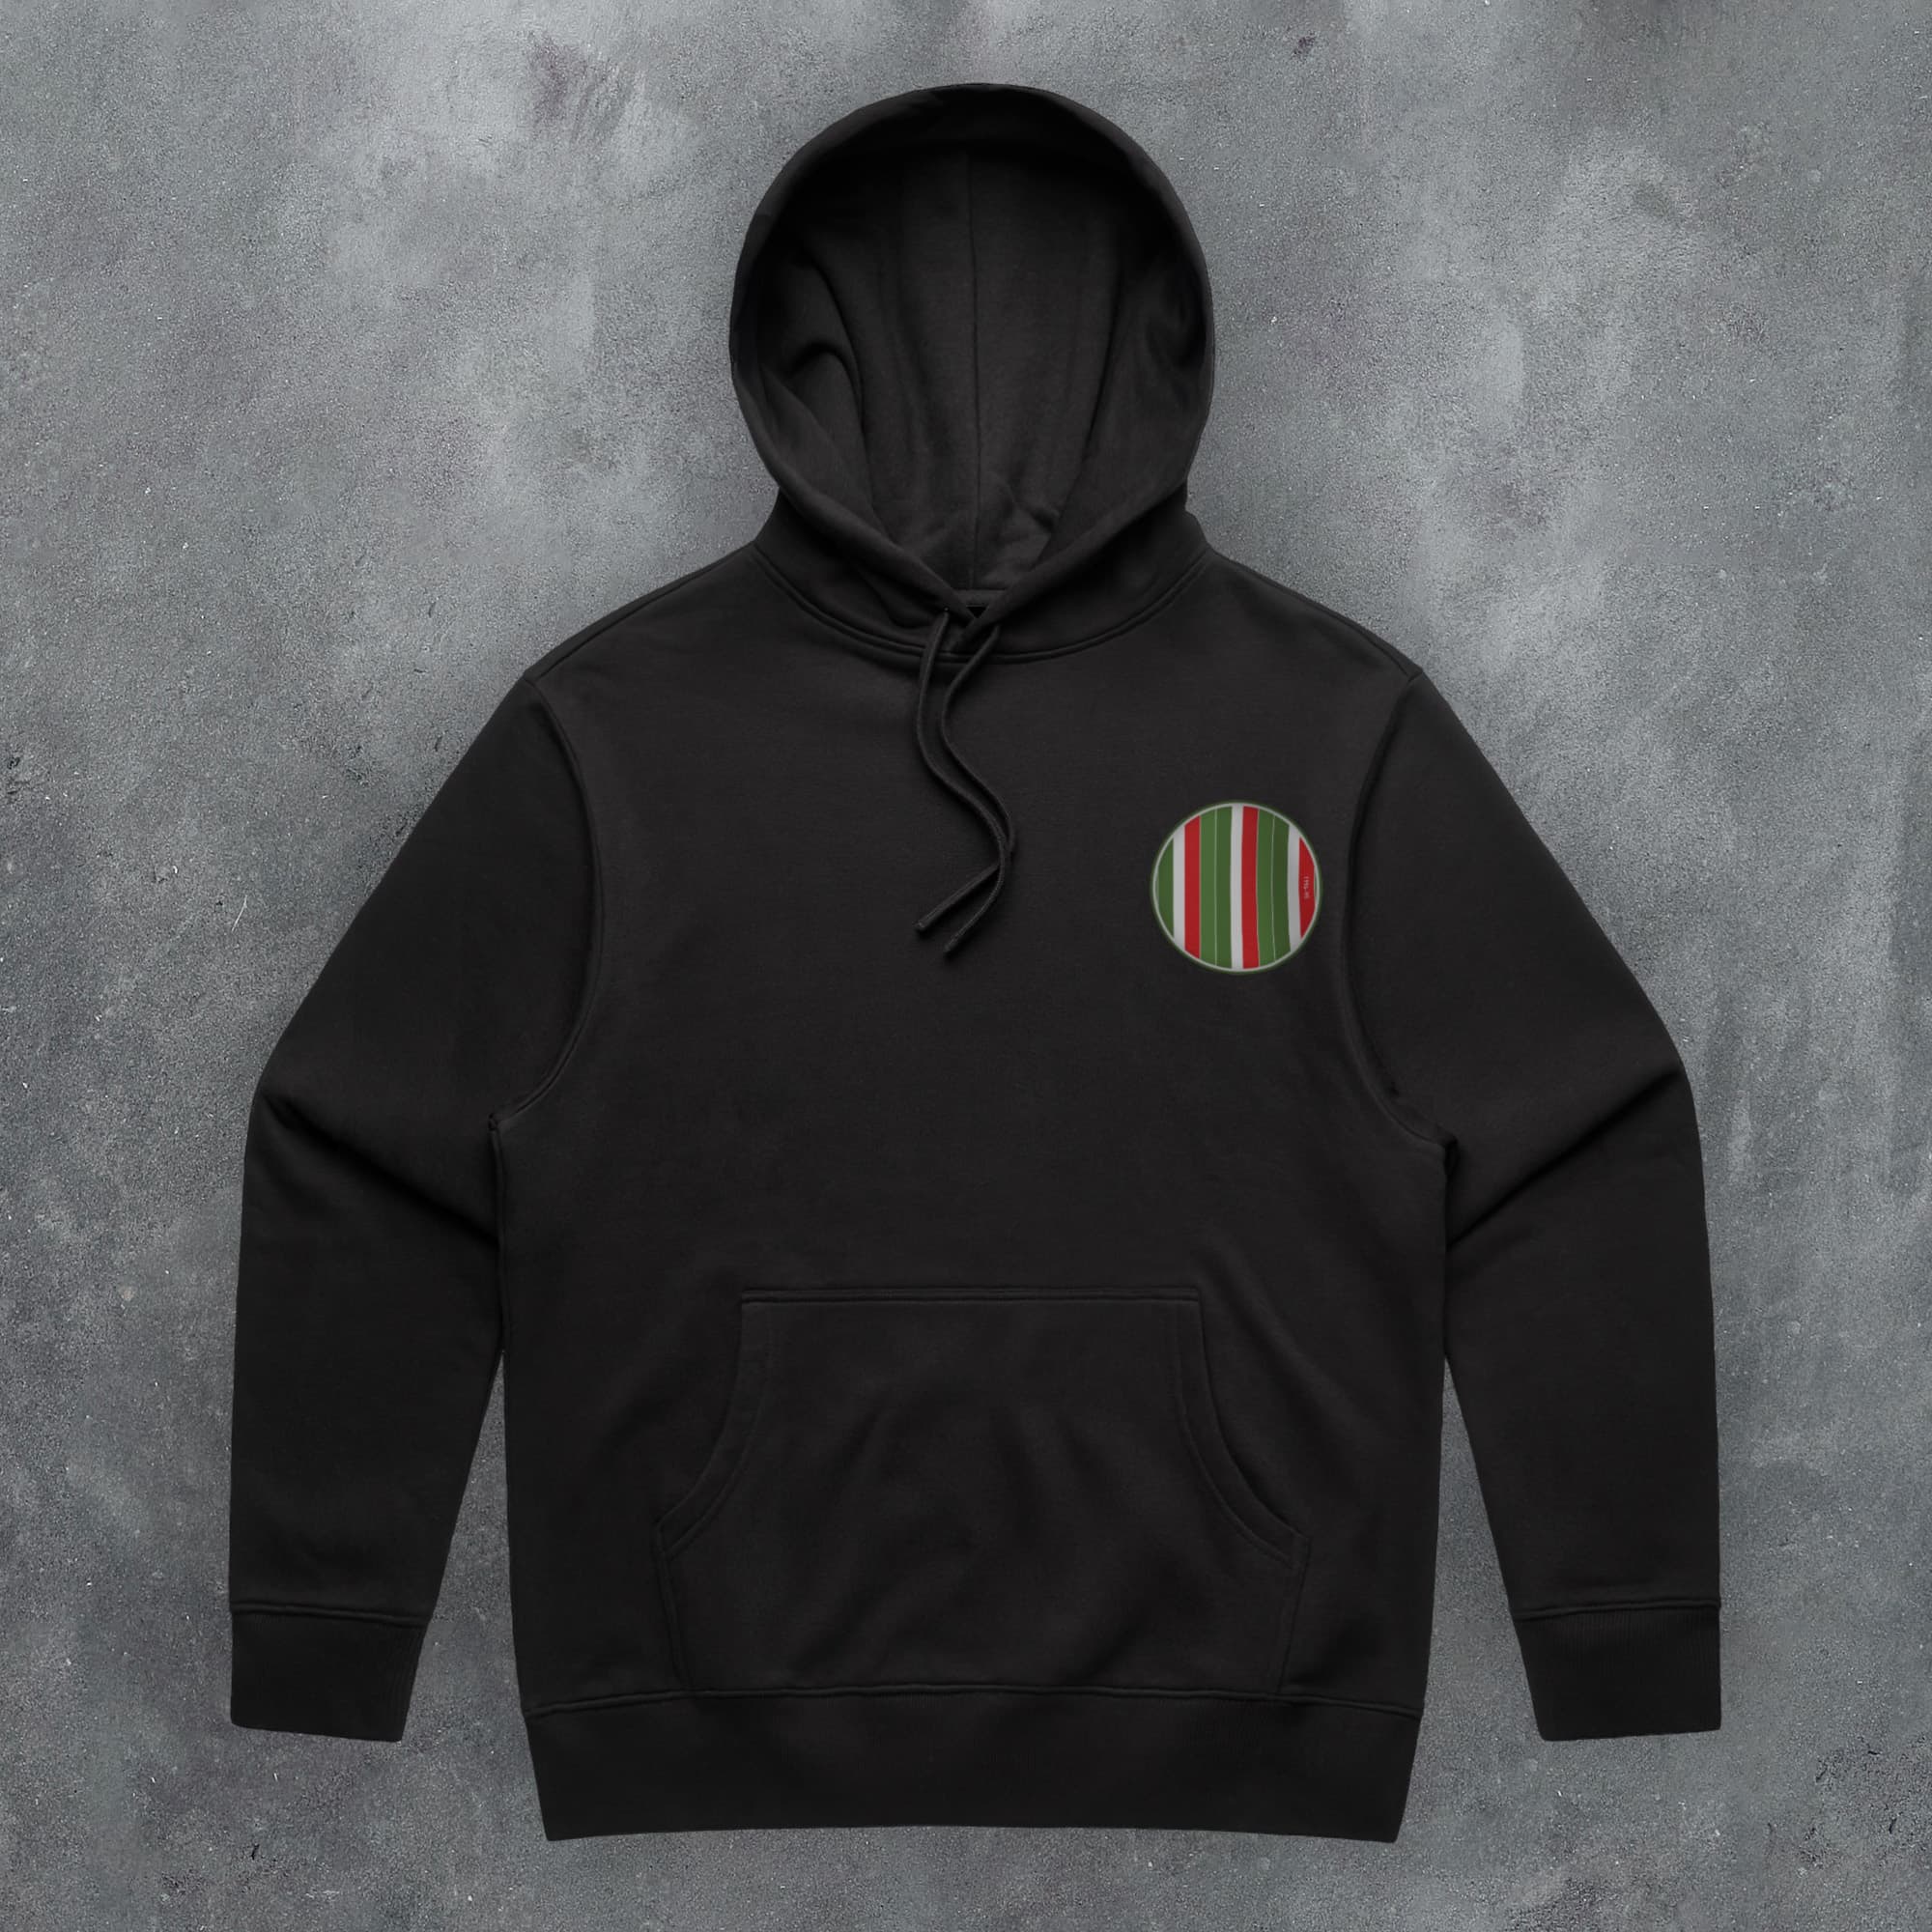 a black hoodie with a green and red stripe on the chest